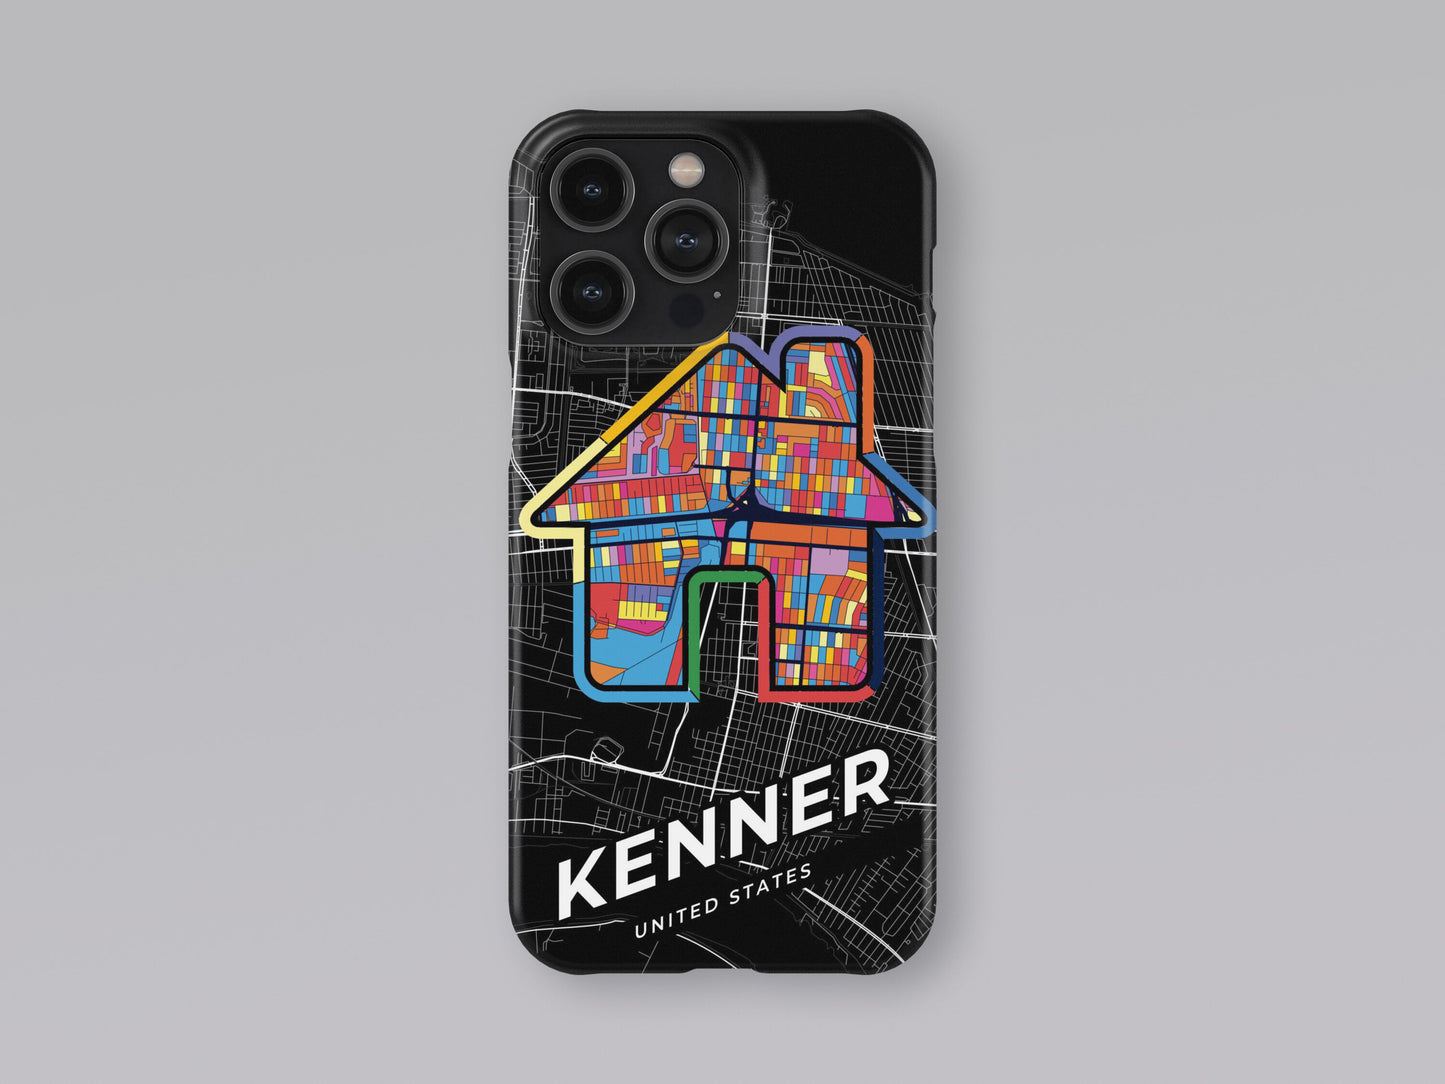 Kenner Louisiana slim phone case with colorful icon. Birthday, wedding or housewarming gift. Couple match cases. 3